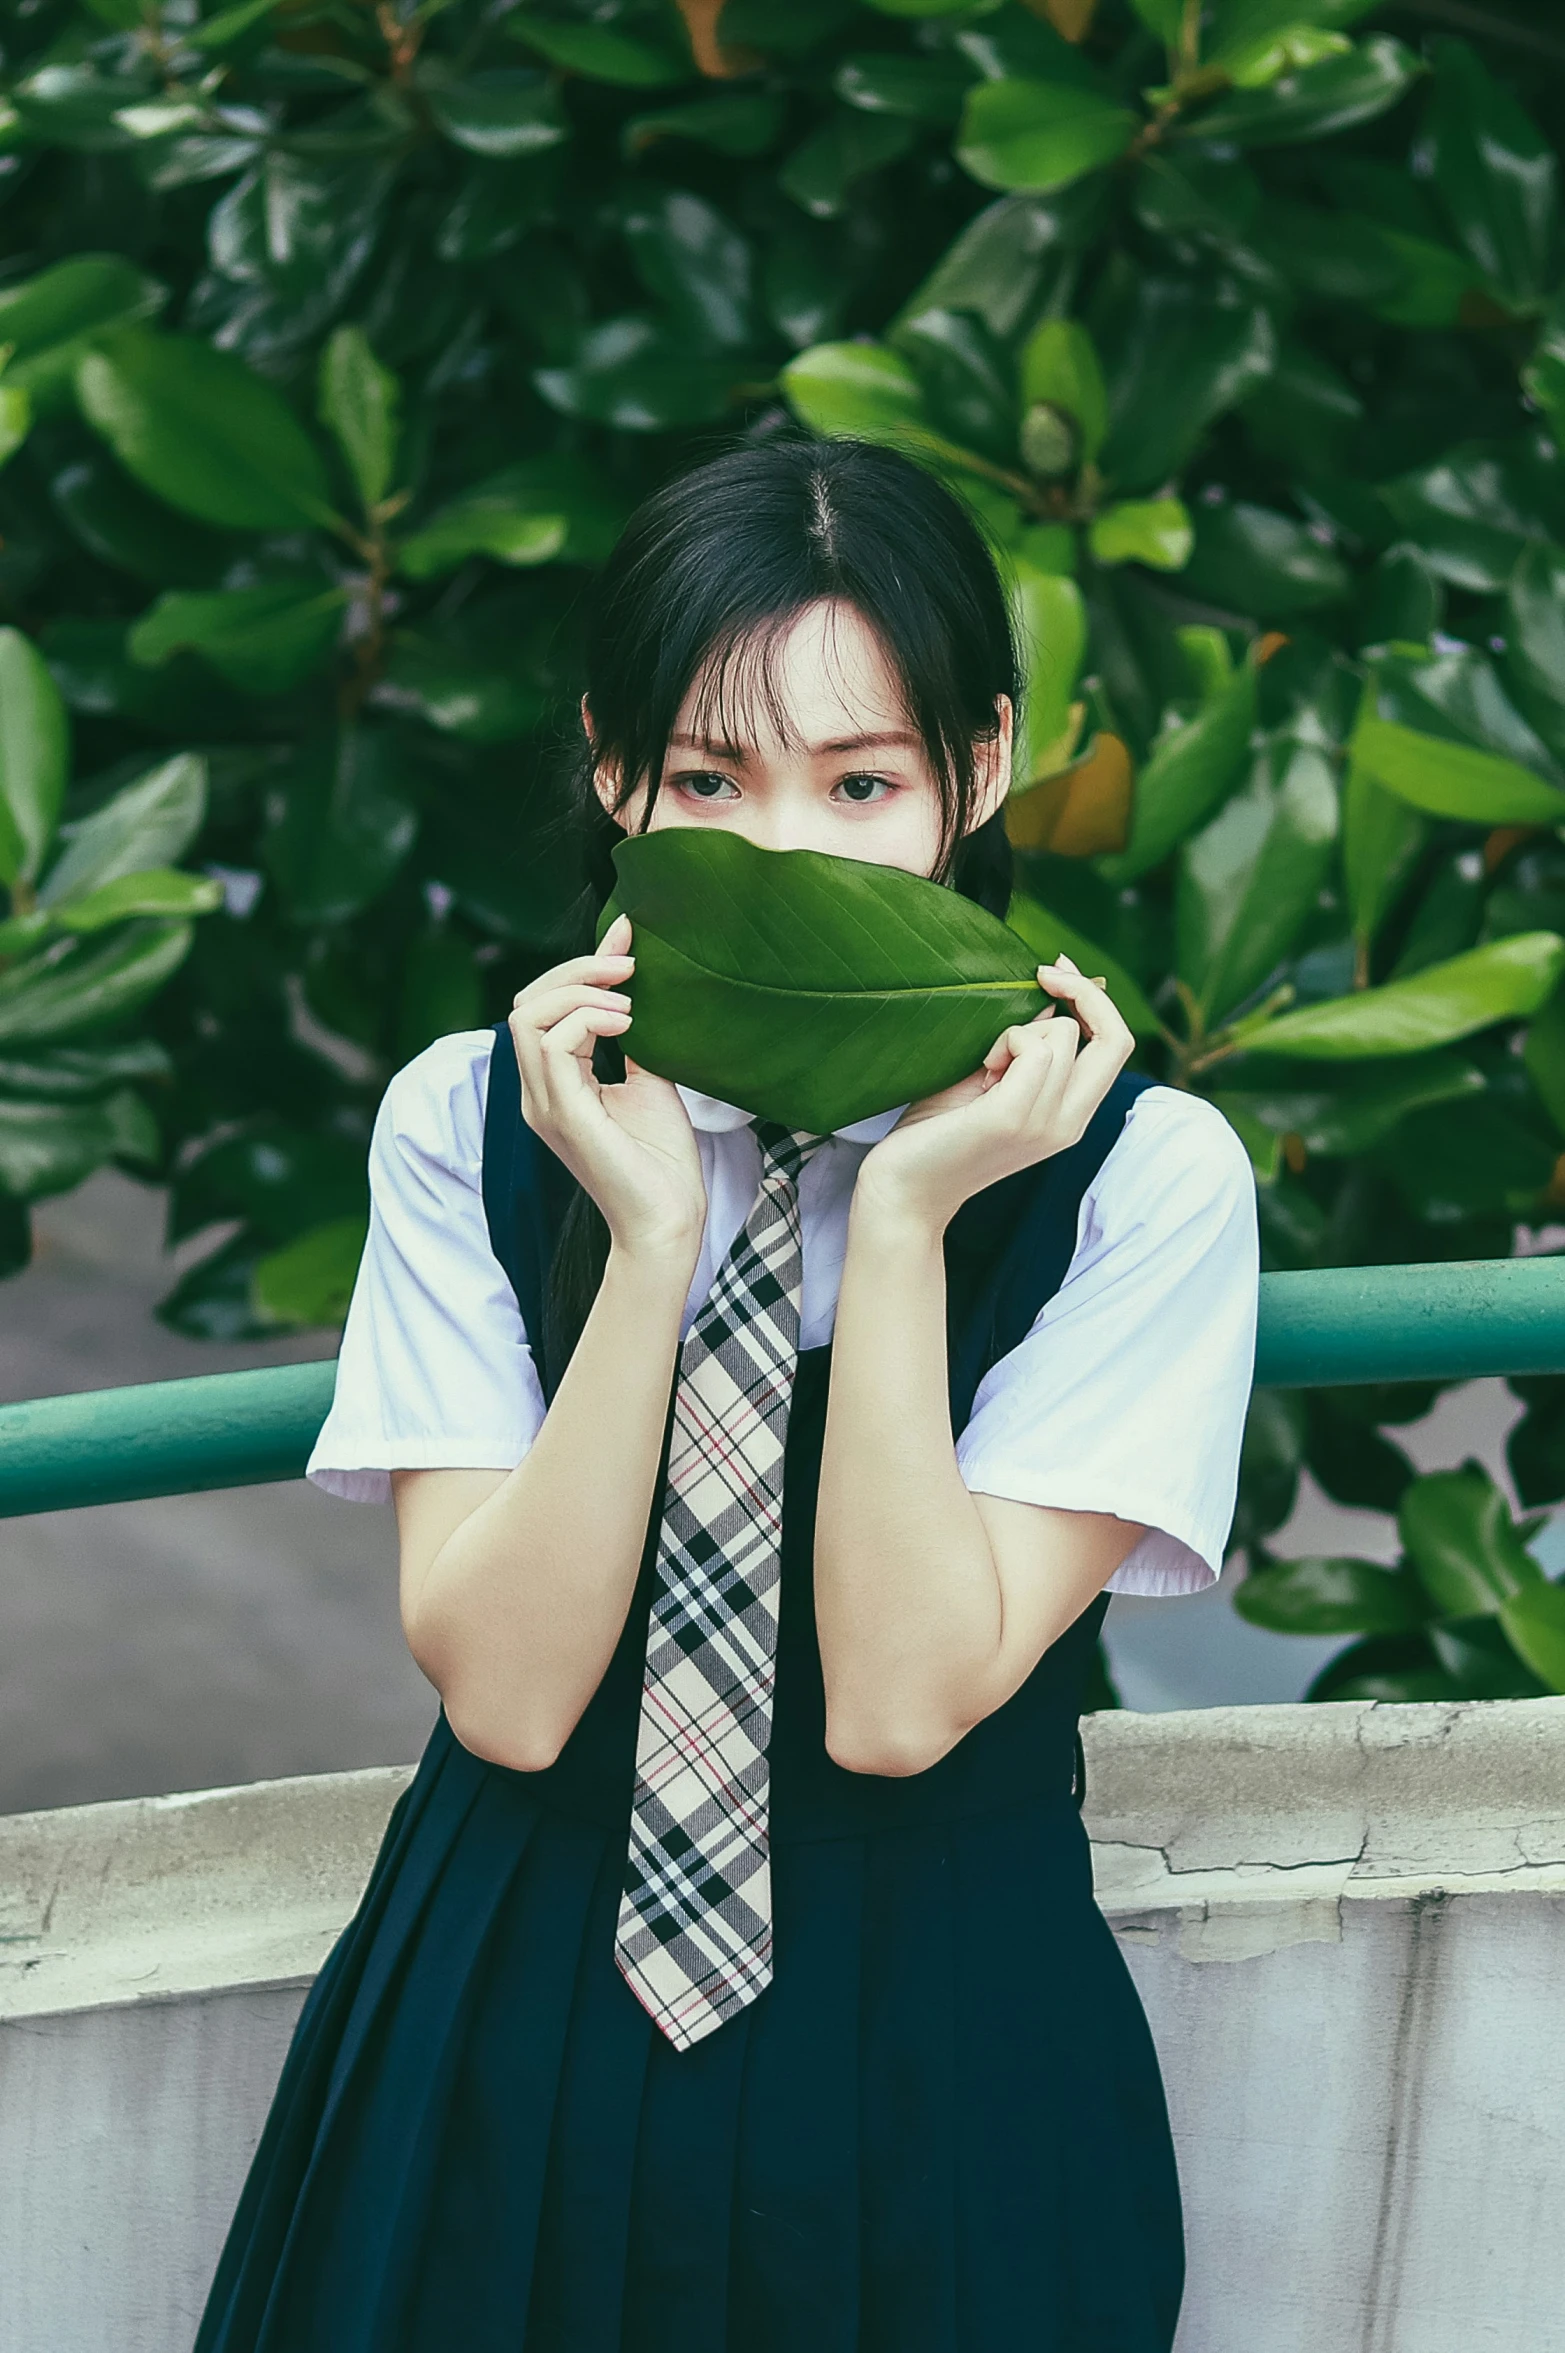 a girl in school dress with tie and a leaf behind her